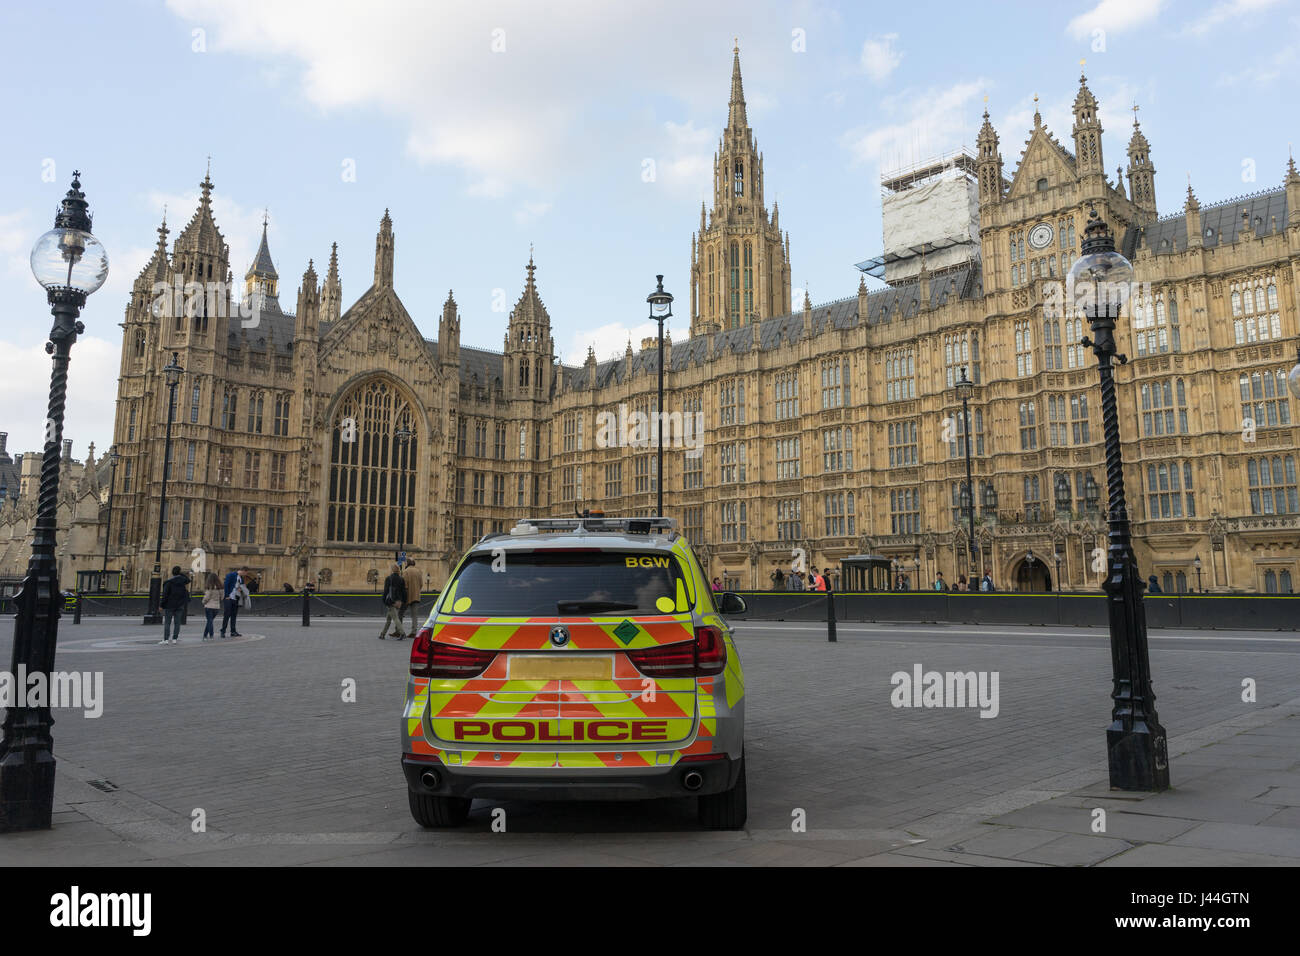 Police car providing high security outside the Houses of Parliament to help prevent a terrorist attack. Stock Photo